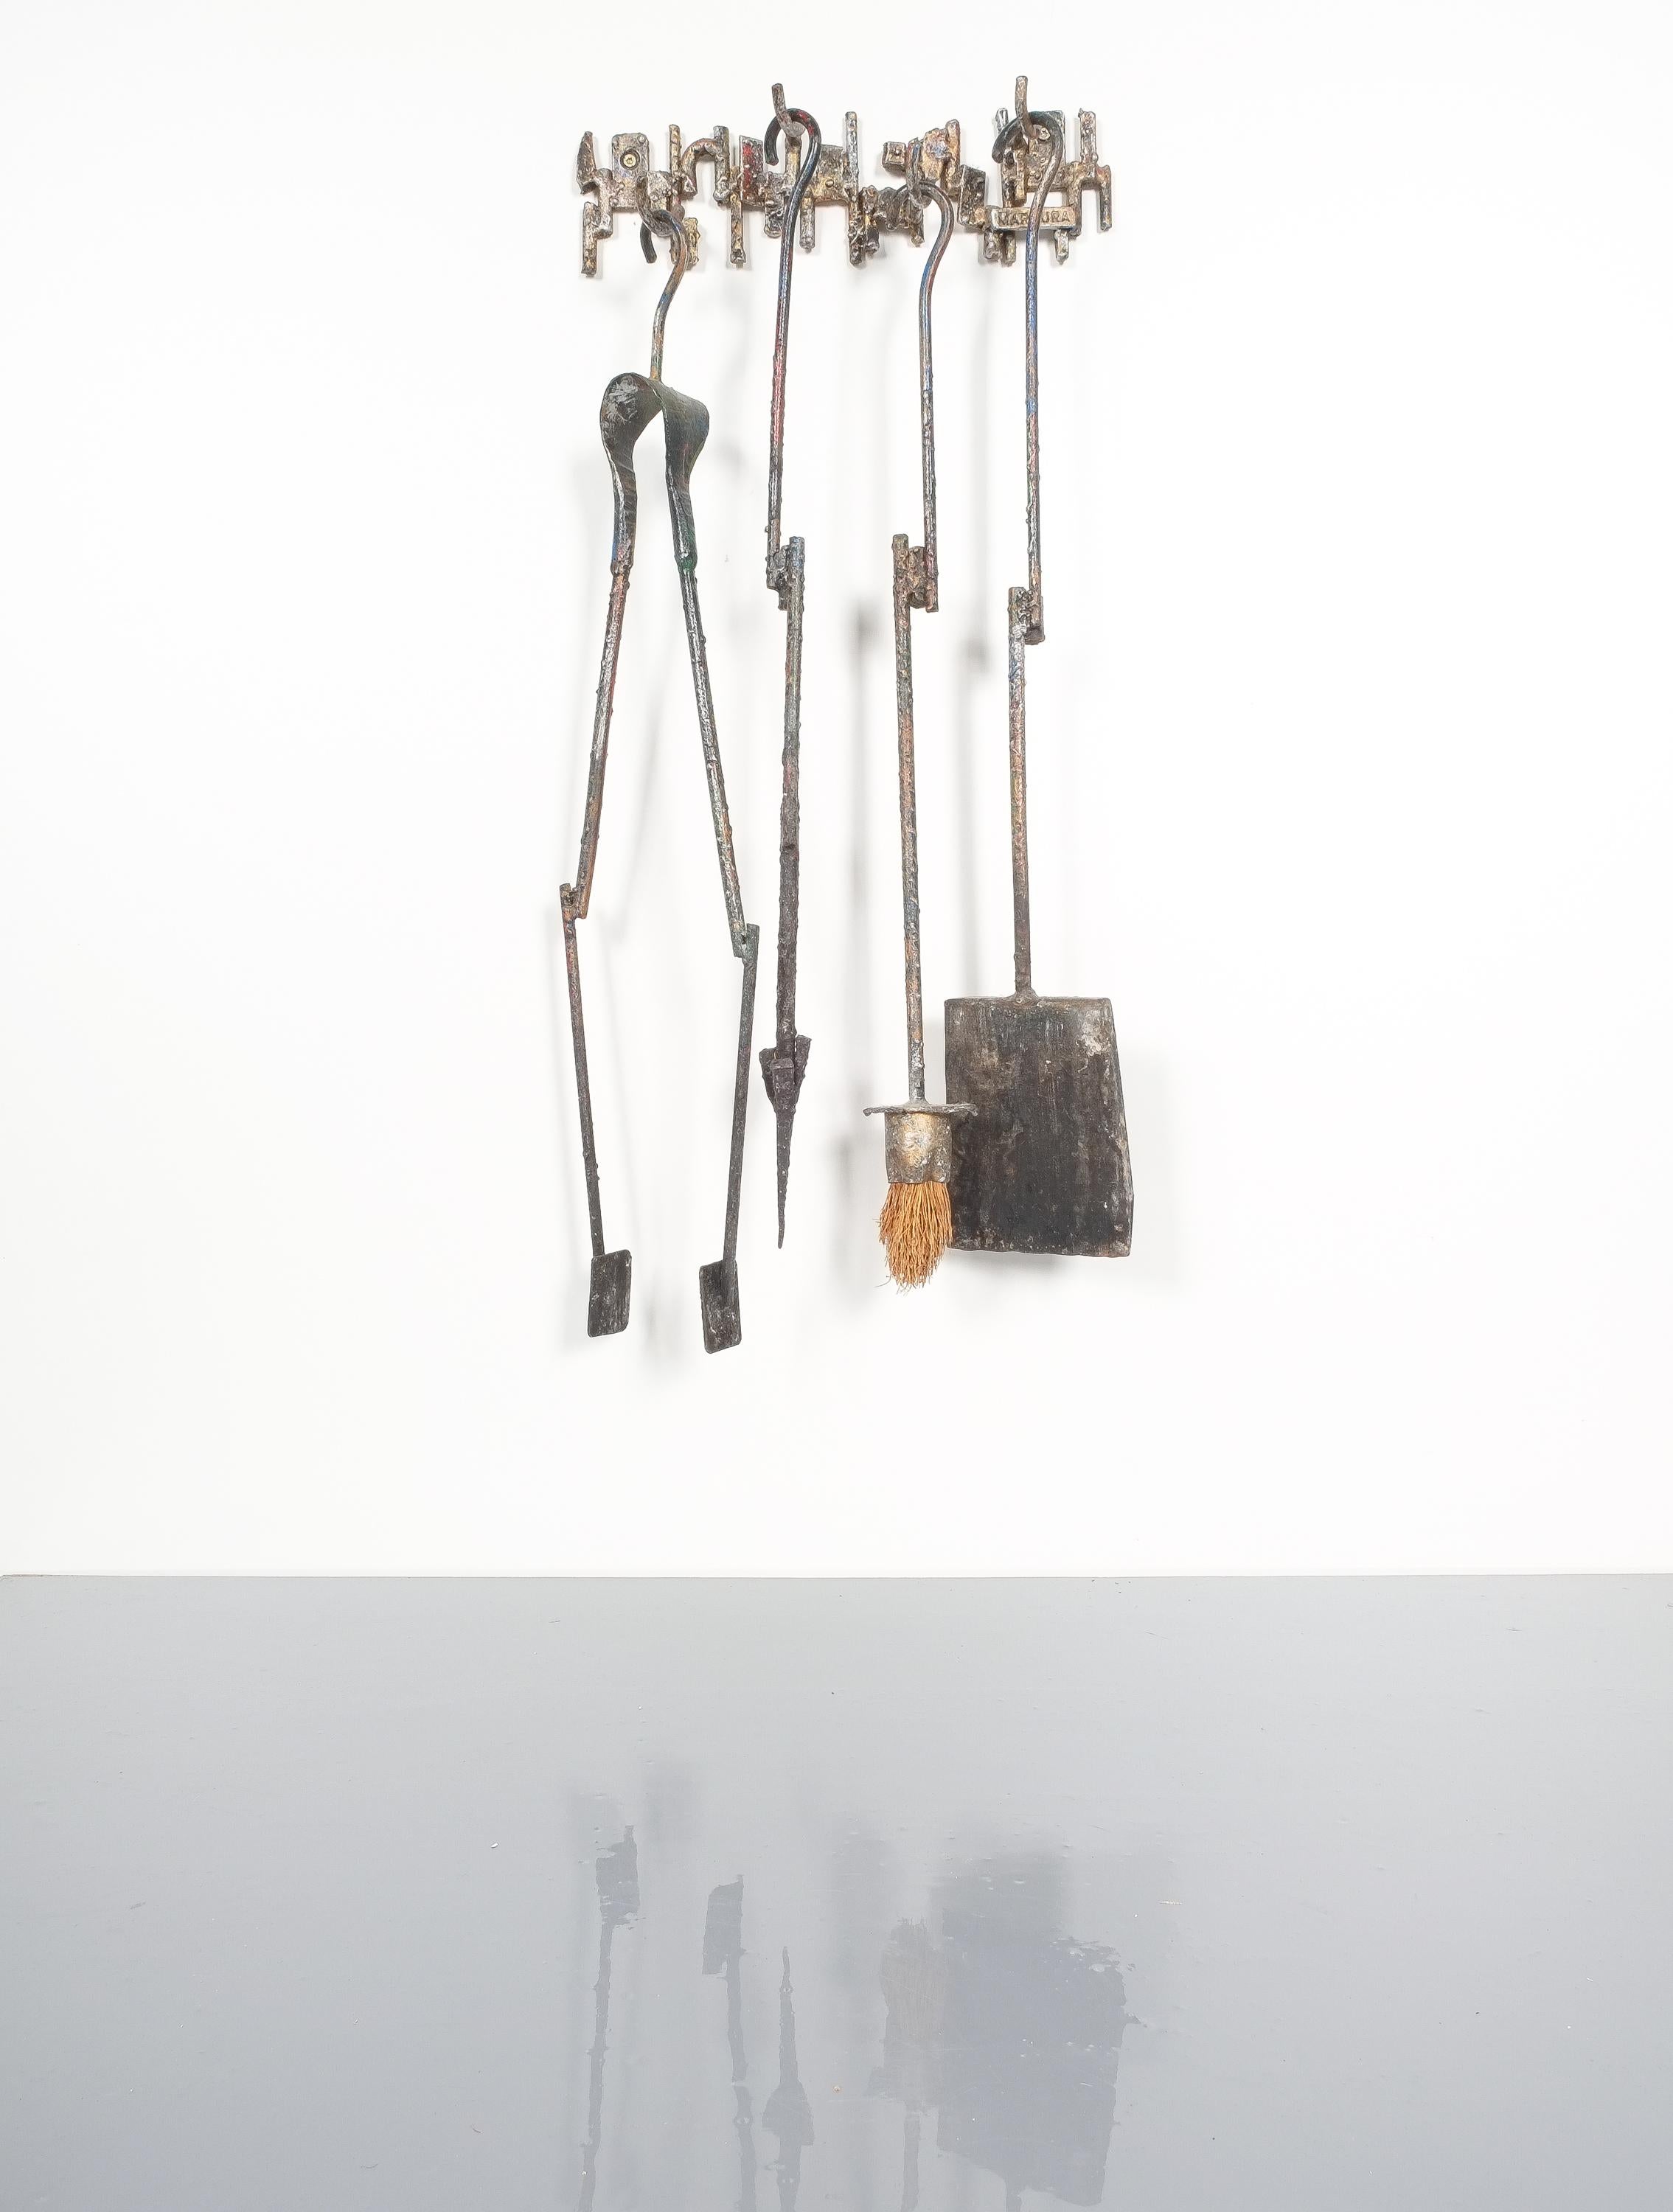 Unique handcrafted set of fire irons by Salvino Marsura, Italy, 1960. Artistic sculptural fireplace tools from welded ornamental iron. It's in original very good condition.